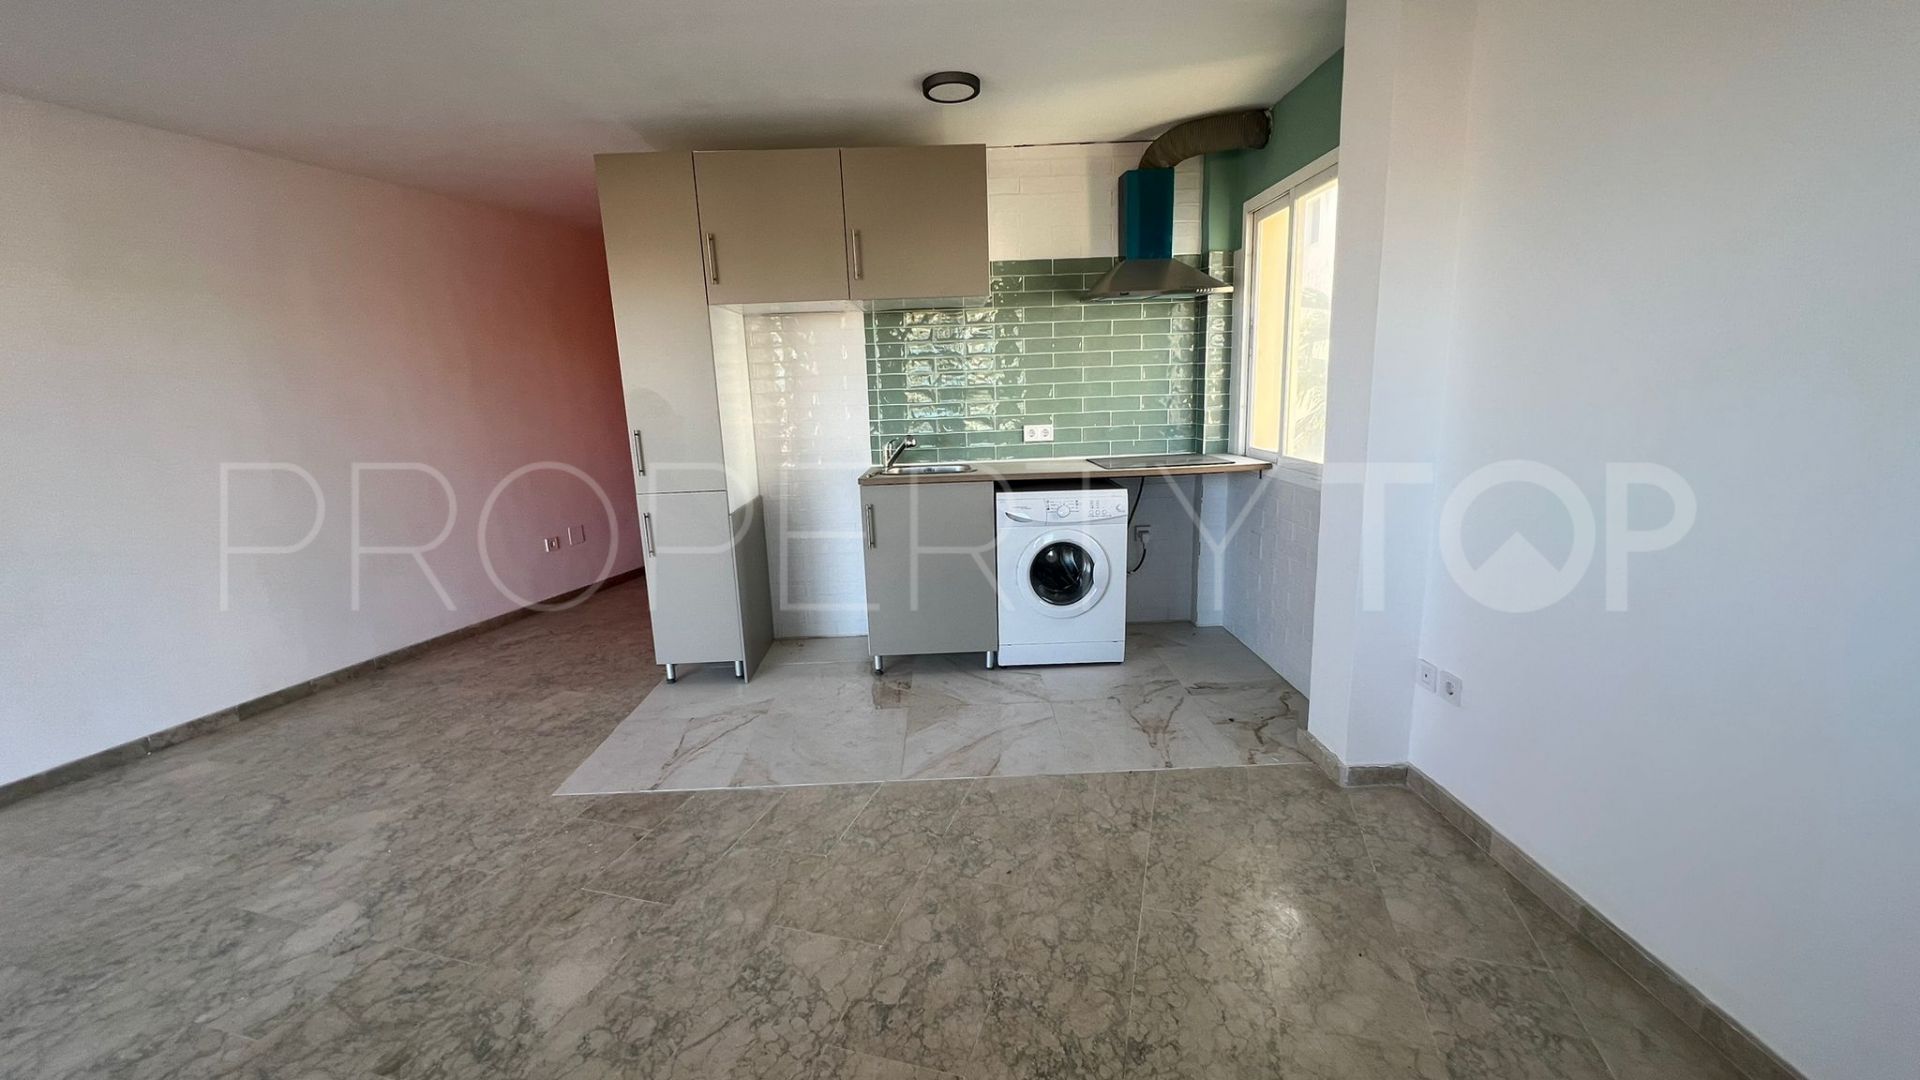 Apartment for sale in Torreblanca with 1 bedroom